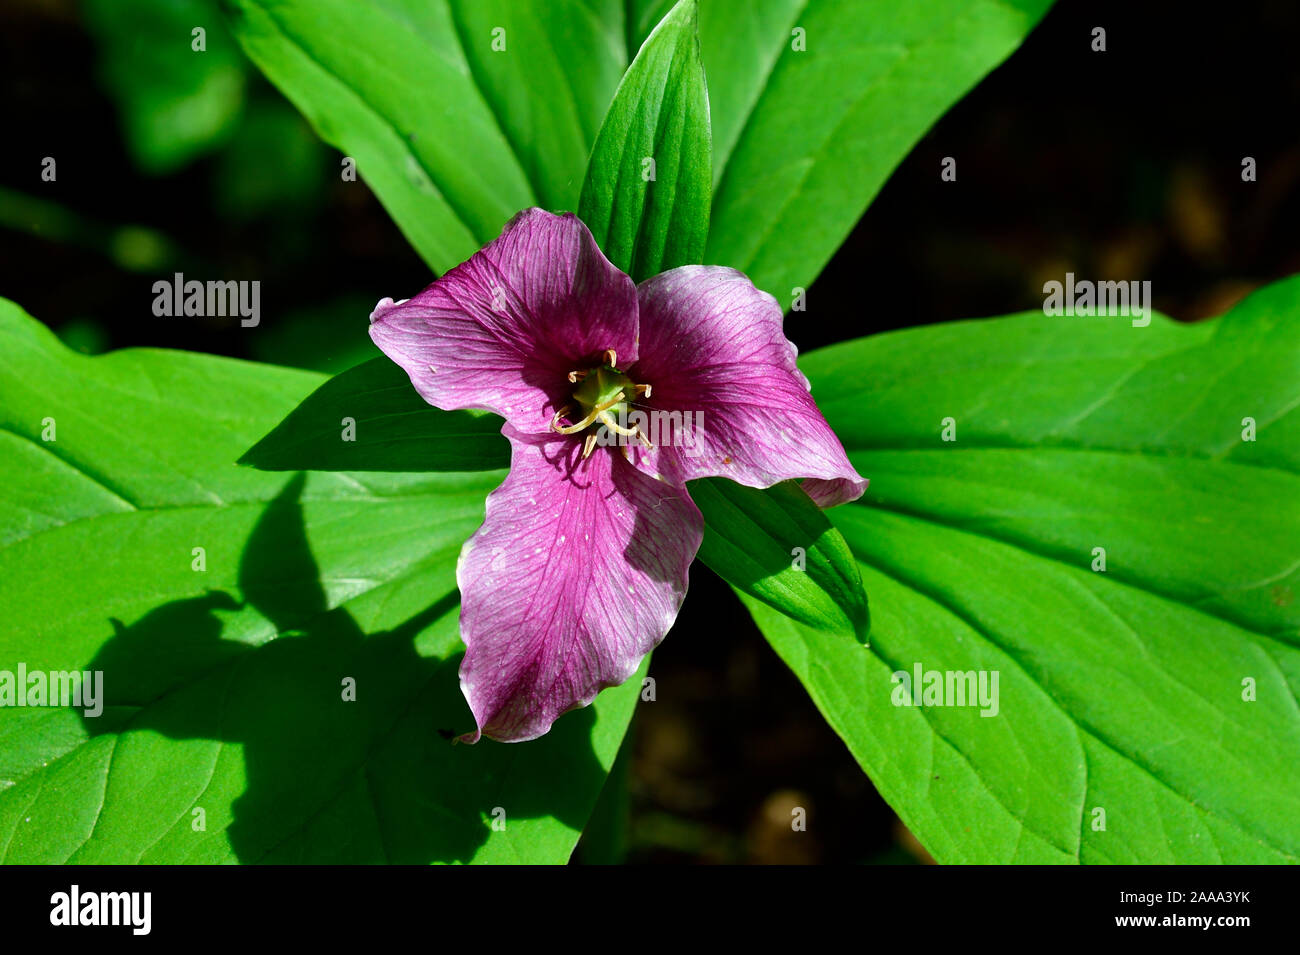 A close up image of a Red Trillium (Trillium erectum), wildflower growing in a wooded area on Vancouver Island British Columbia Canada. Stock Photo